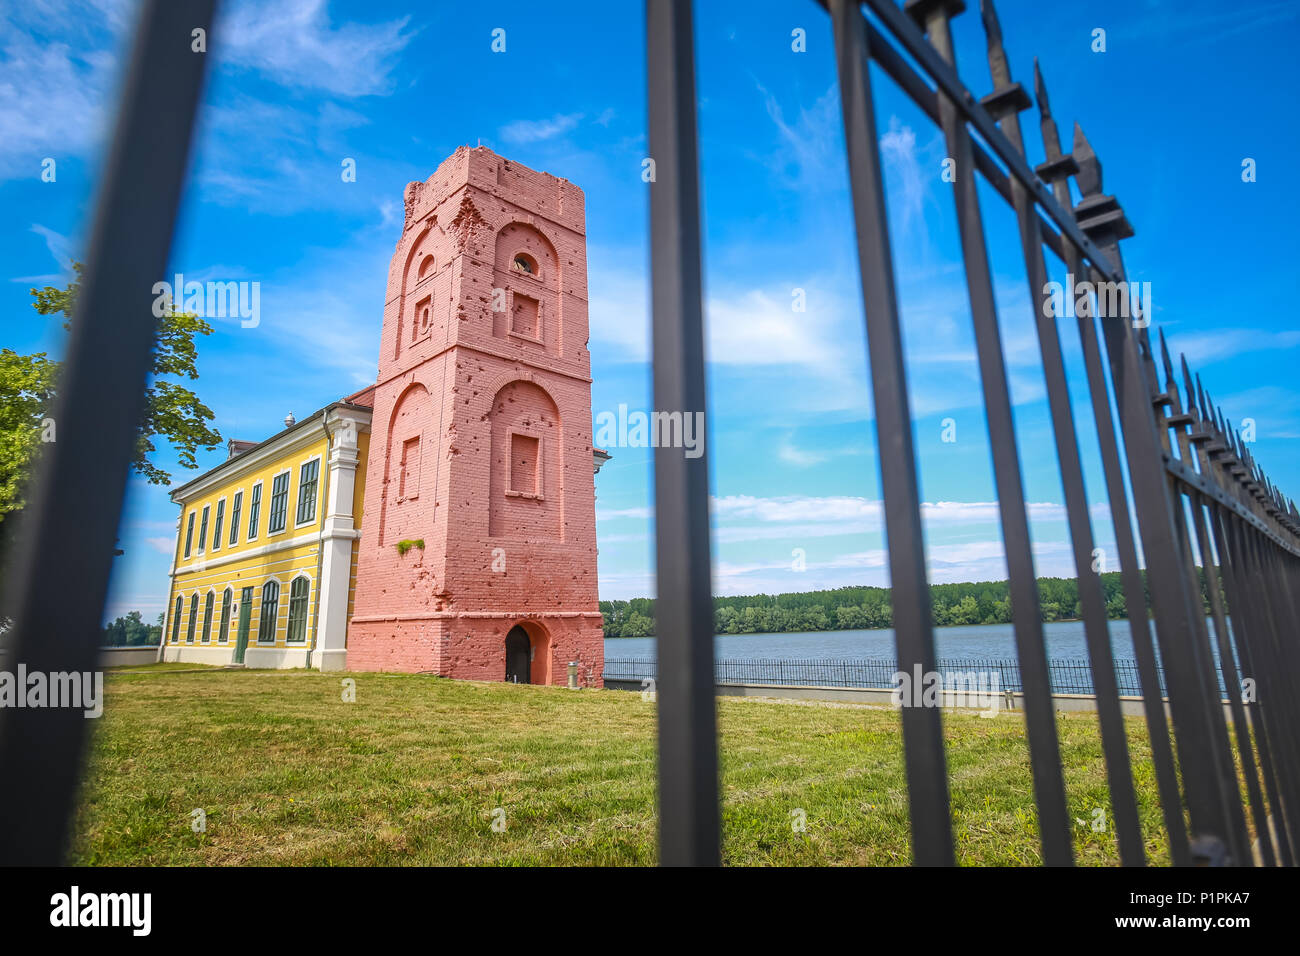 VUKOVAR, CROATIA - MAY 14, 2018 : Renovated tower that is part of the City museum on the coast of river Danube viewed thru the fence in Vukovar, Croat Stock Photo